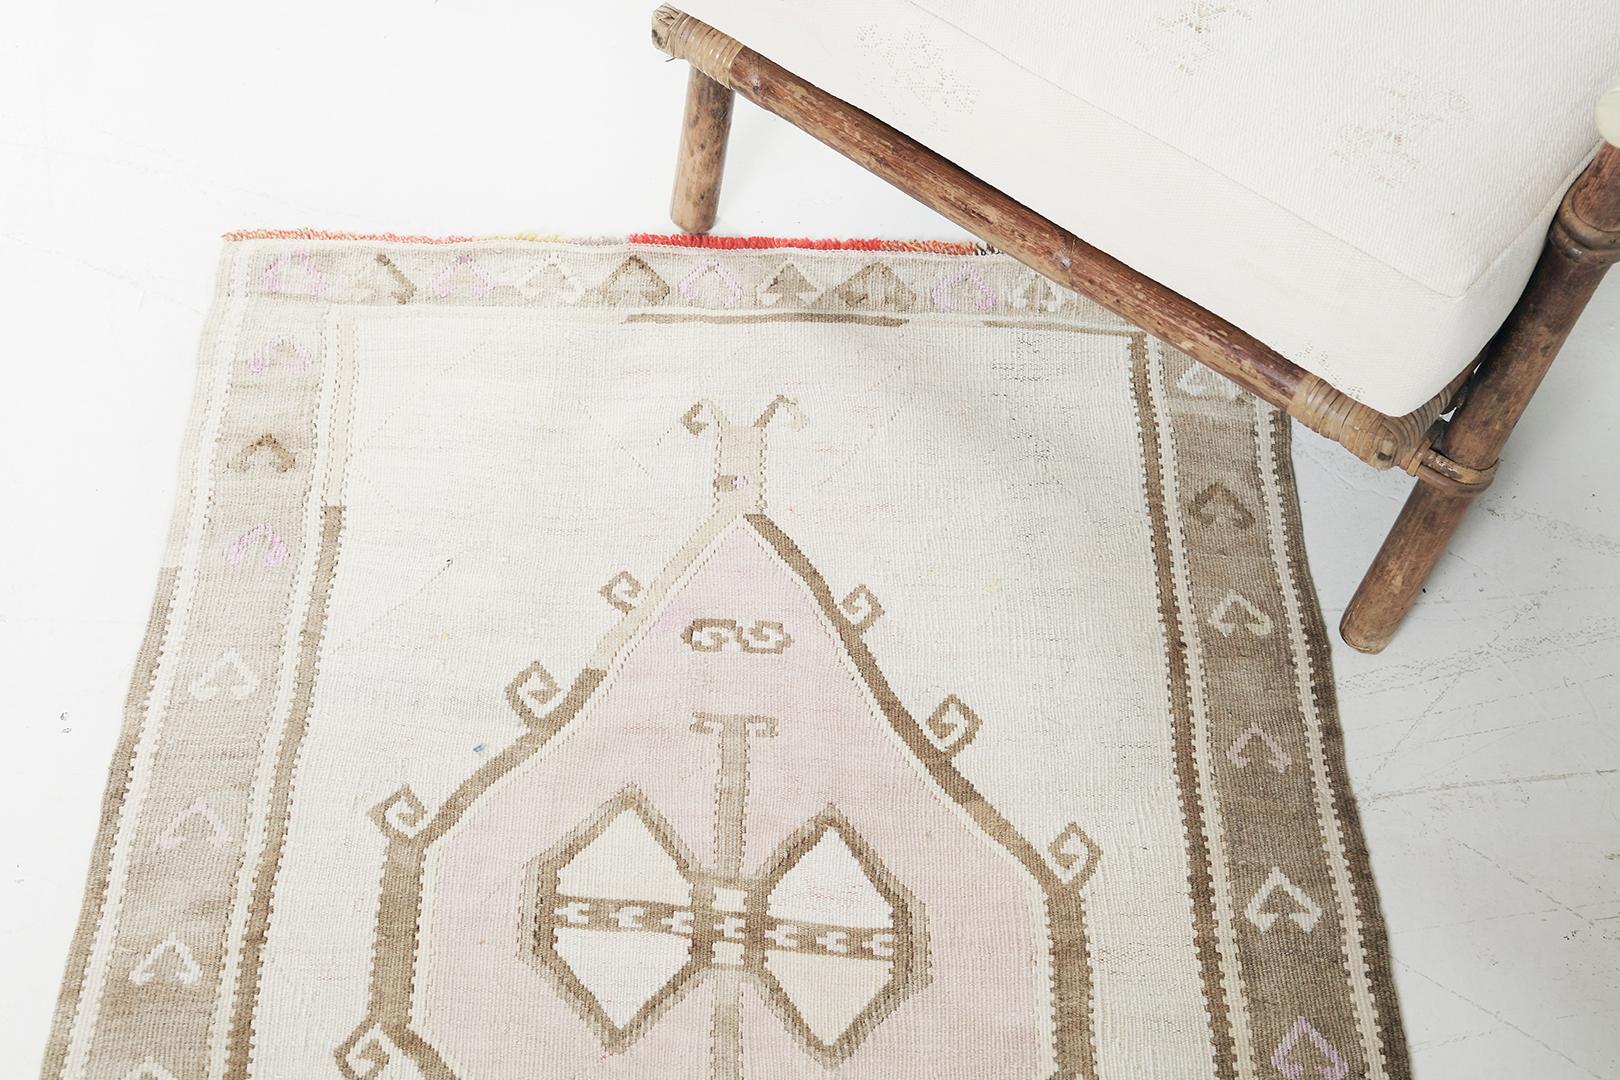 Revealing the breathtaking minimalist art form, this amazing rug will definitely captivate every viewer upon laying your eyes on this Vintage Turkish Kars Kilim rug. Featuring the earthy colour scheme of ivory and taupe, this rug creates an